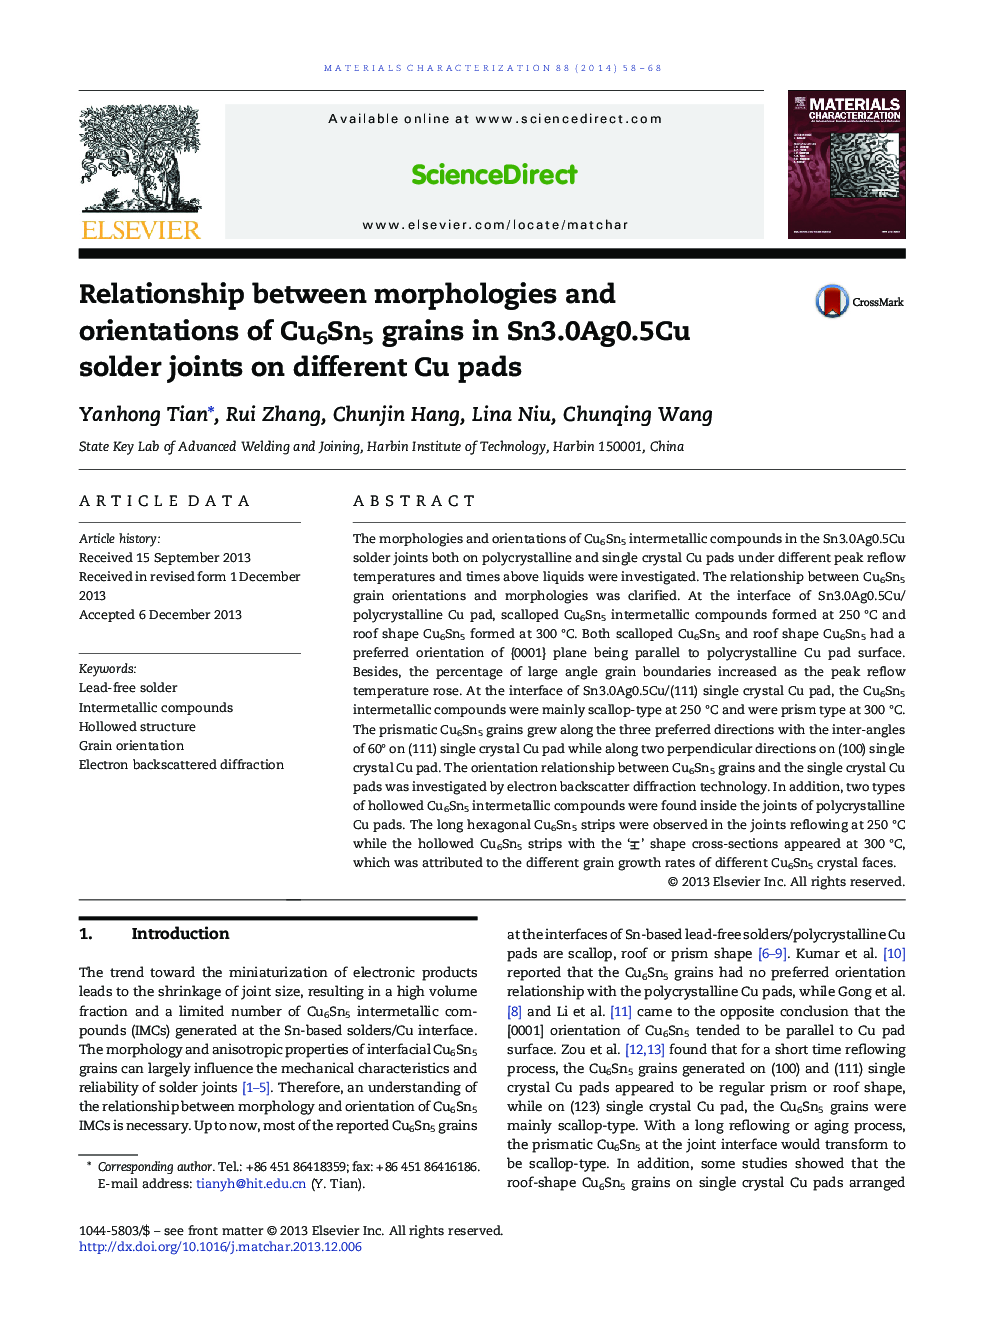 Relationship between morphologies and orientations of Cu6Sn5 grains in Sn3.0Ag0.5Cu solder joints on different Cu pads